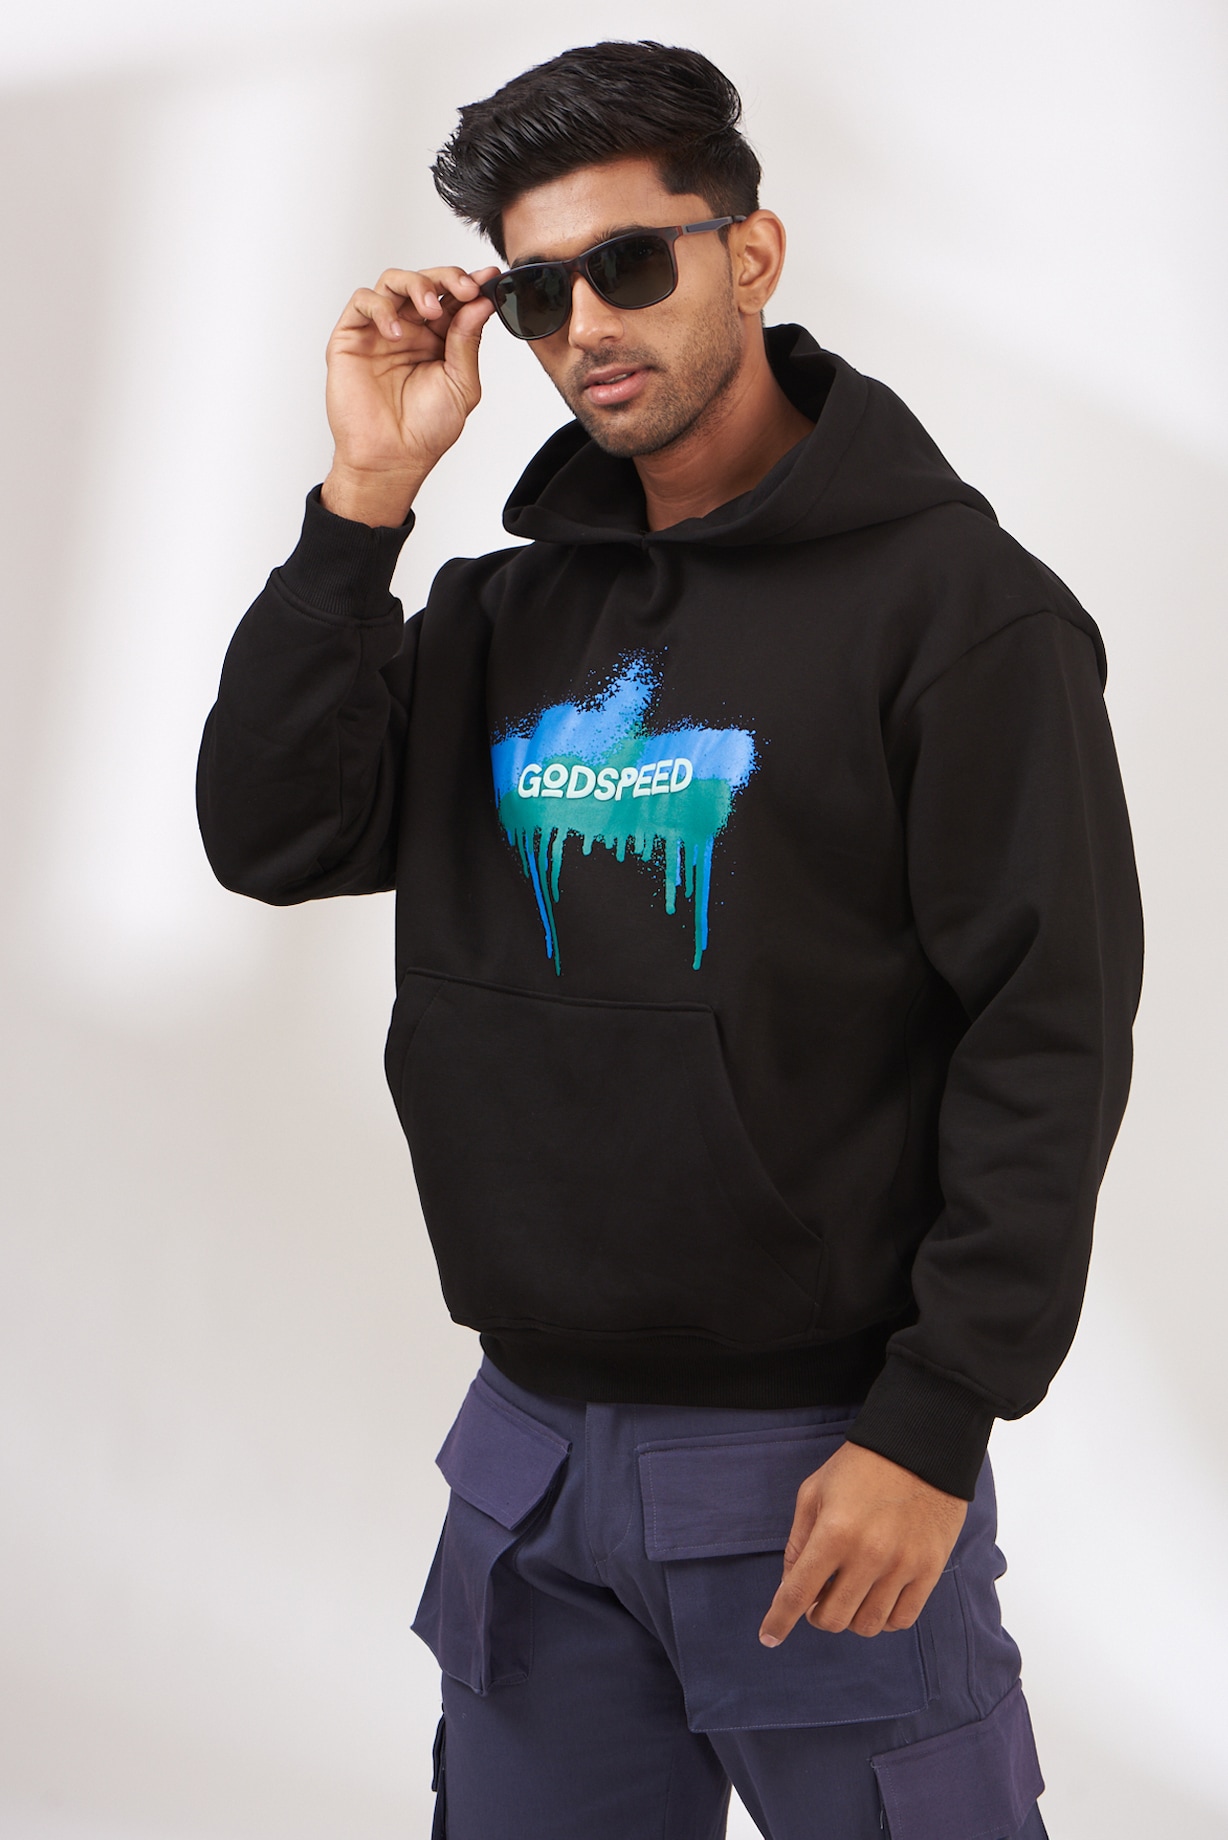 Black Cotton Fleece Hoodie by The Khwaab